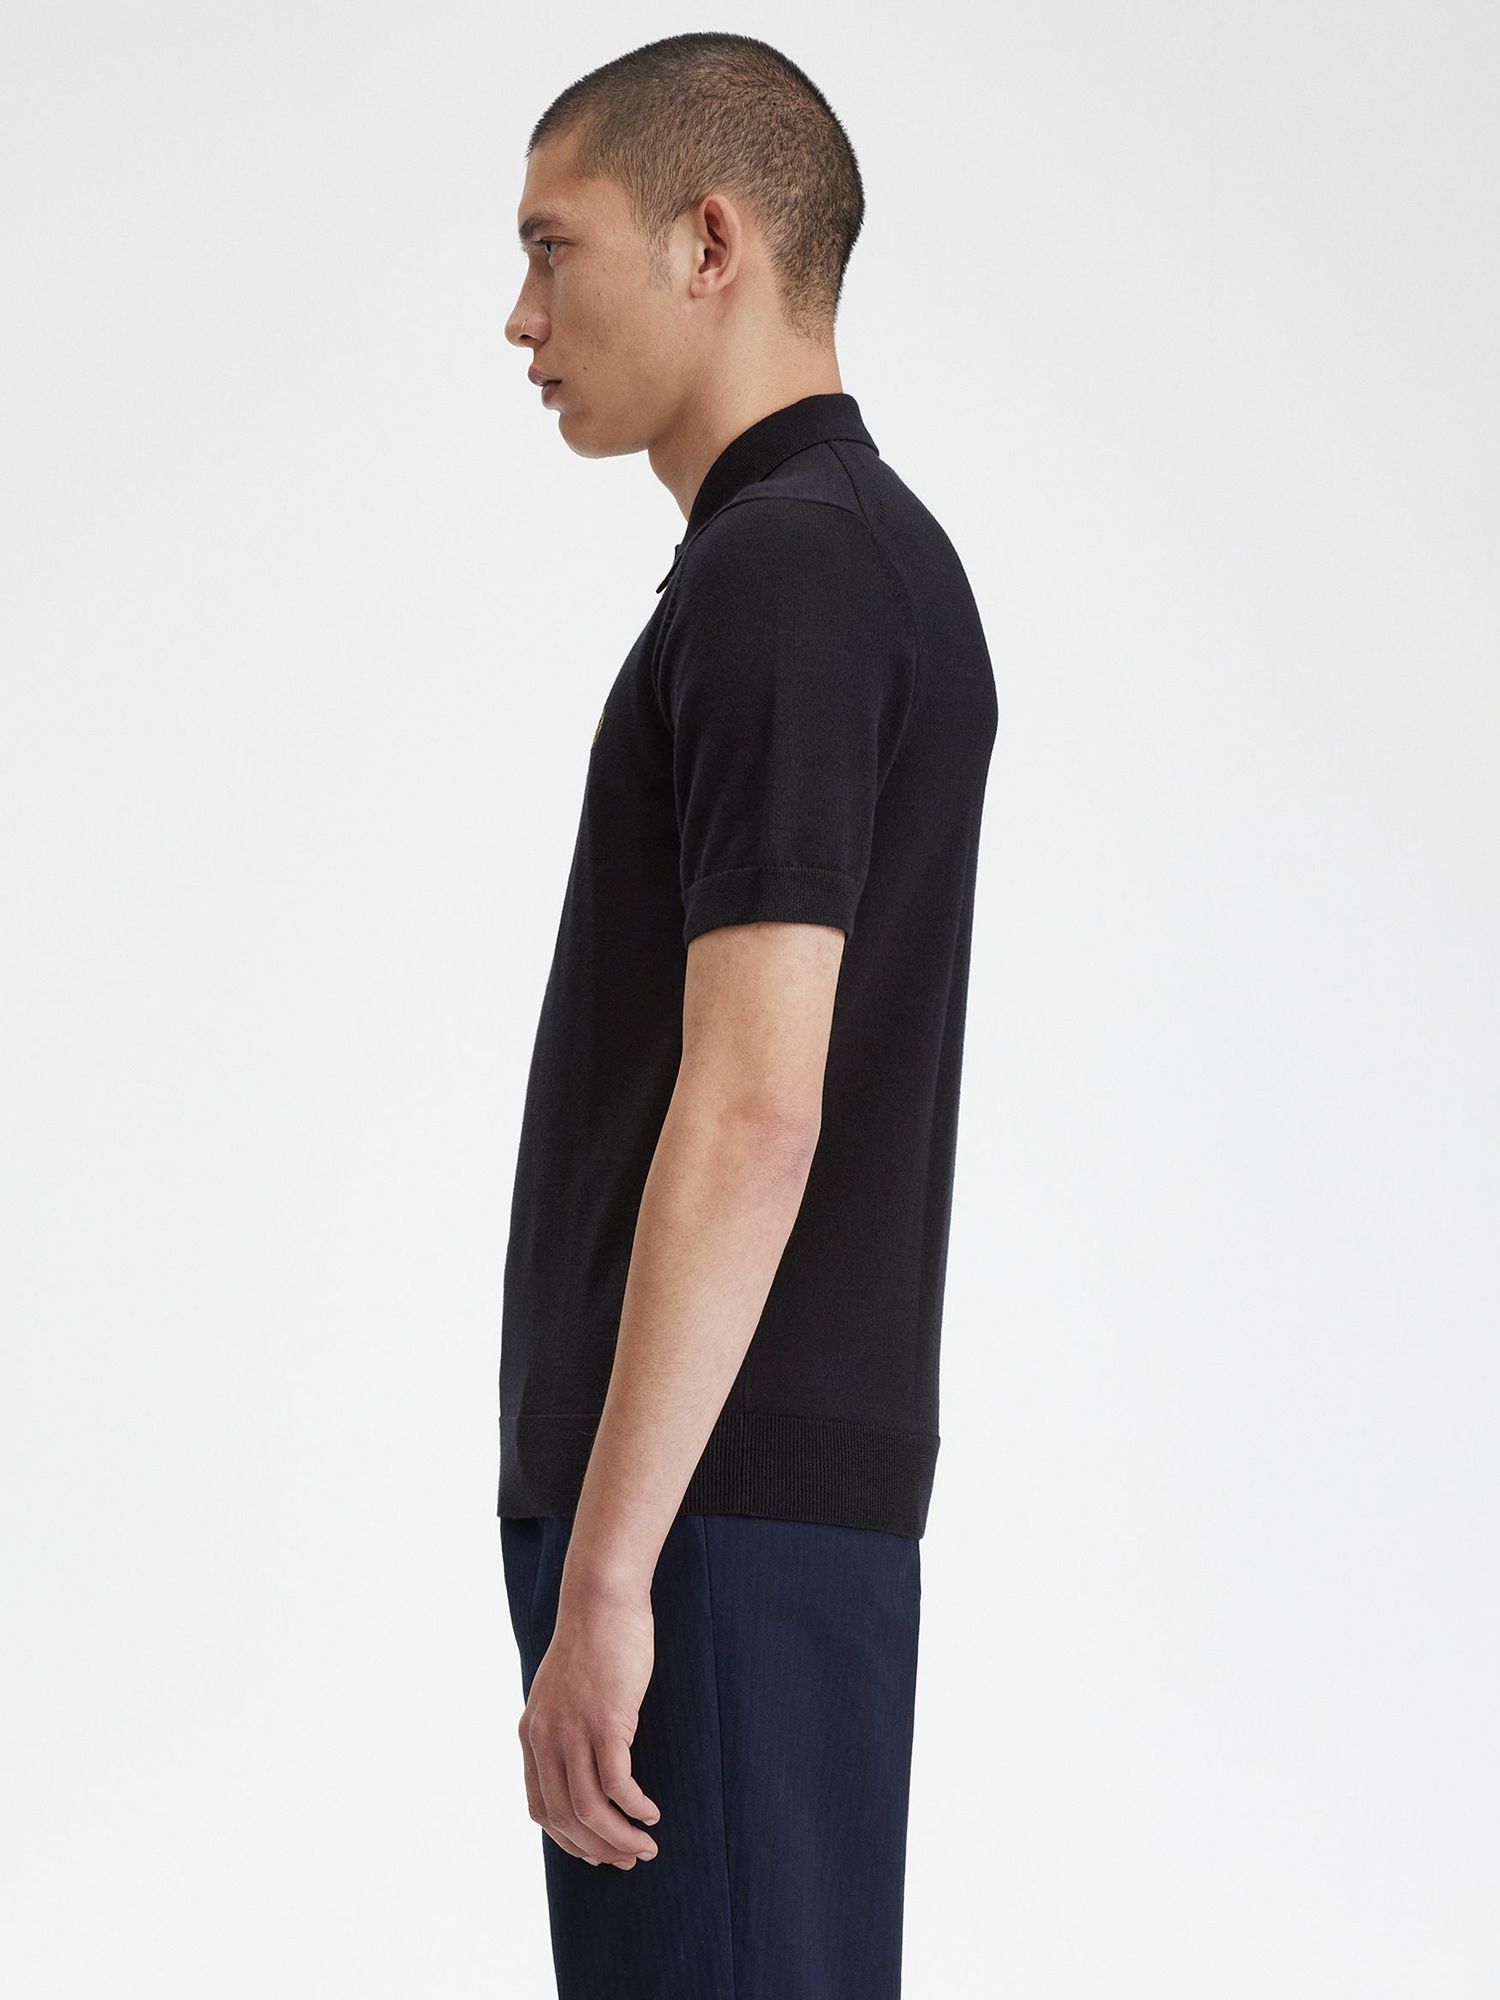 Buy Fred Perry Wool Blend Classic Knitted Polo Shirt Online at johnlewis.com